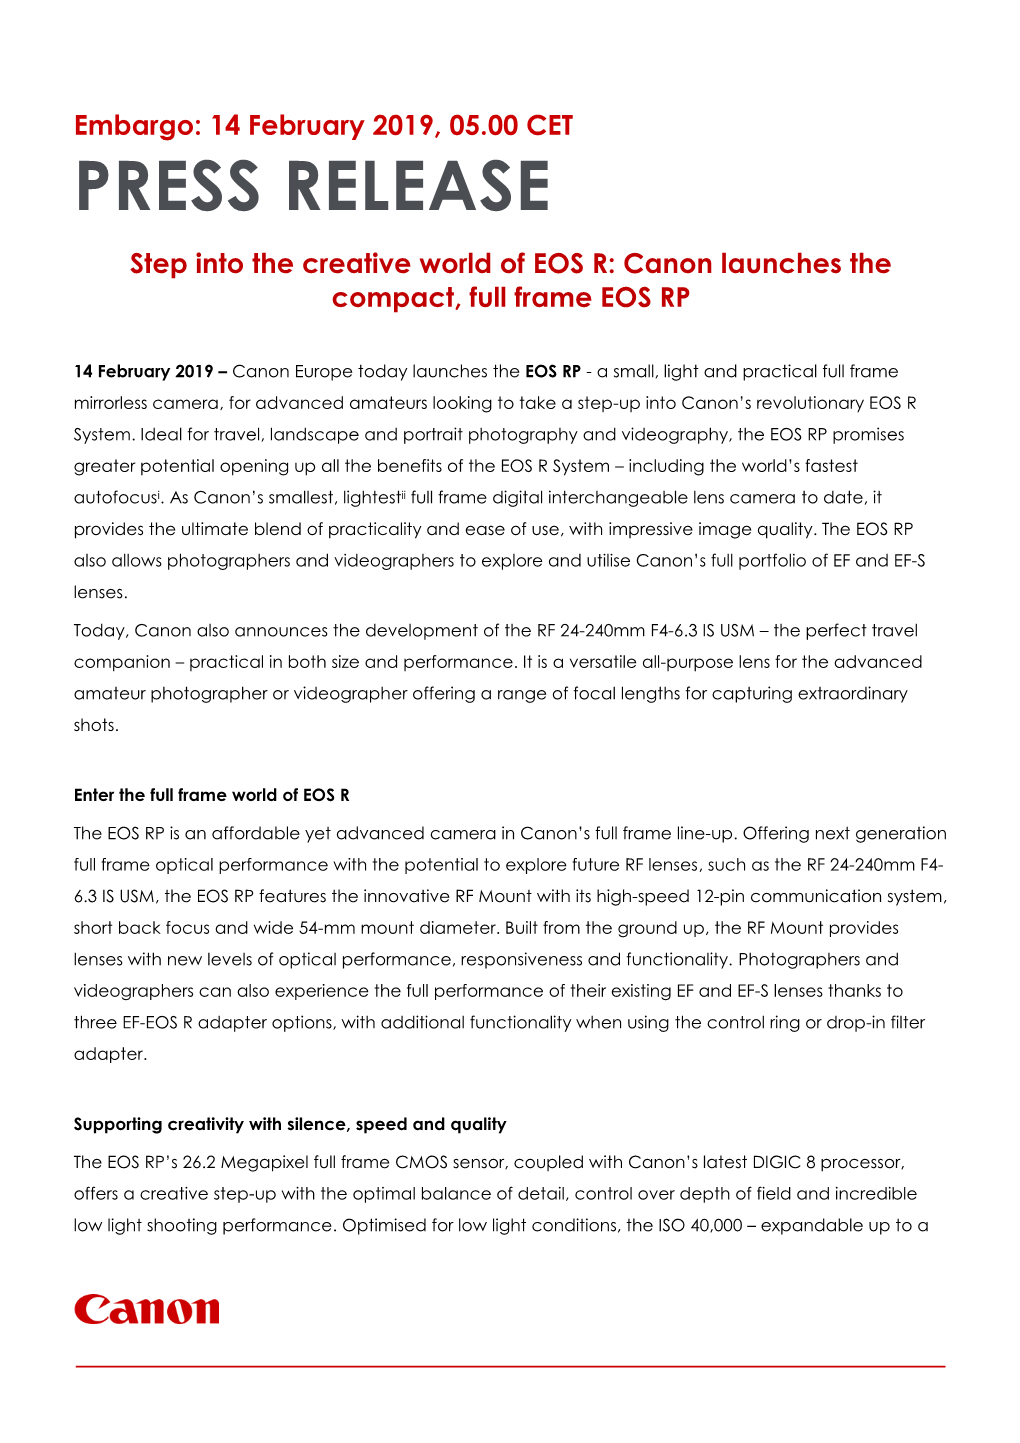 PRESS RELEASE Step Into the Creative World of EOS R: Canon Launches the Compact, Full Frame EOS RP